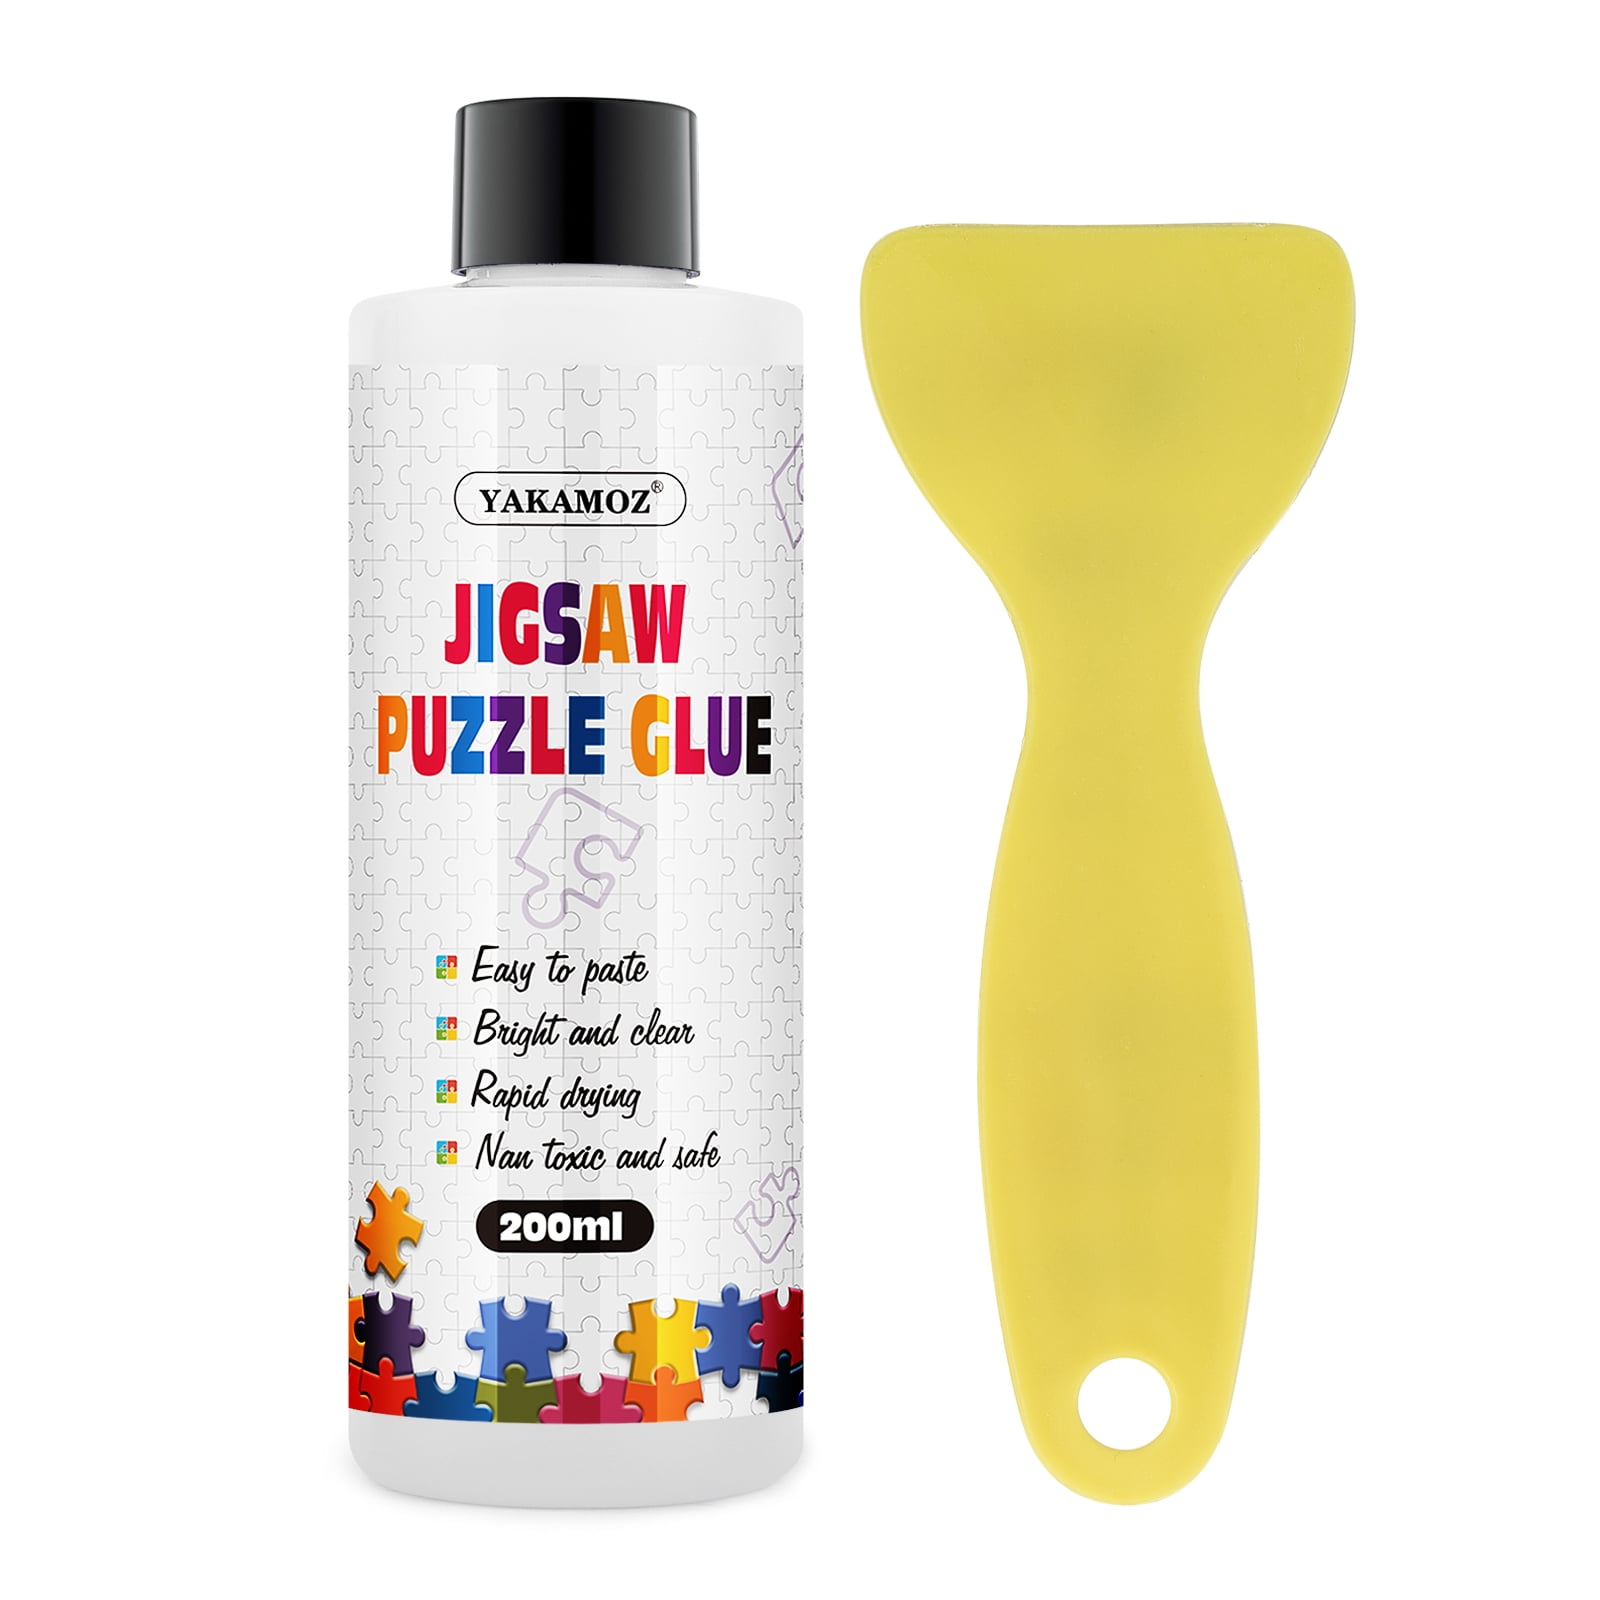  Nariolar Jigsaw Puzzle Glue Clear with Applicator Suitable for  Fixing and Hanging Puzzles, Quick Drying, 4 Ounces : Toys & Games